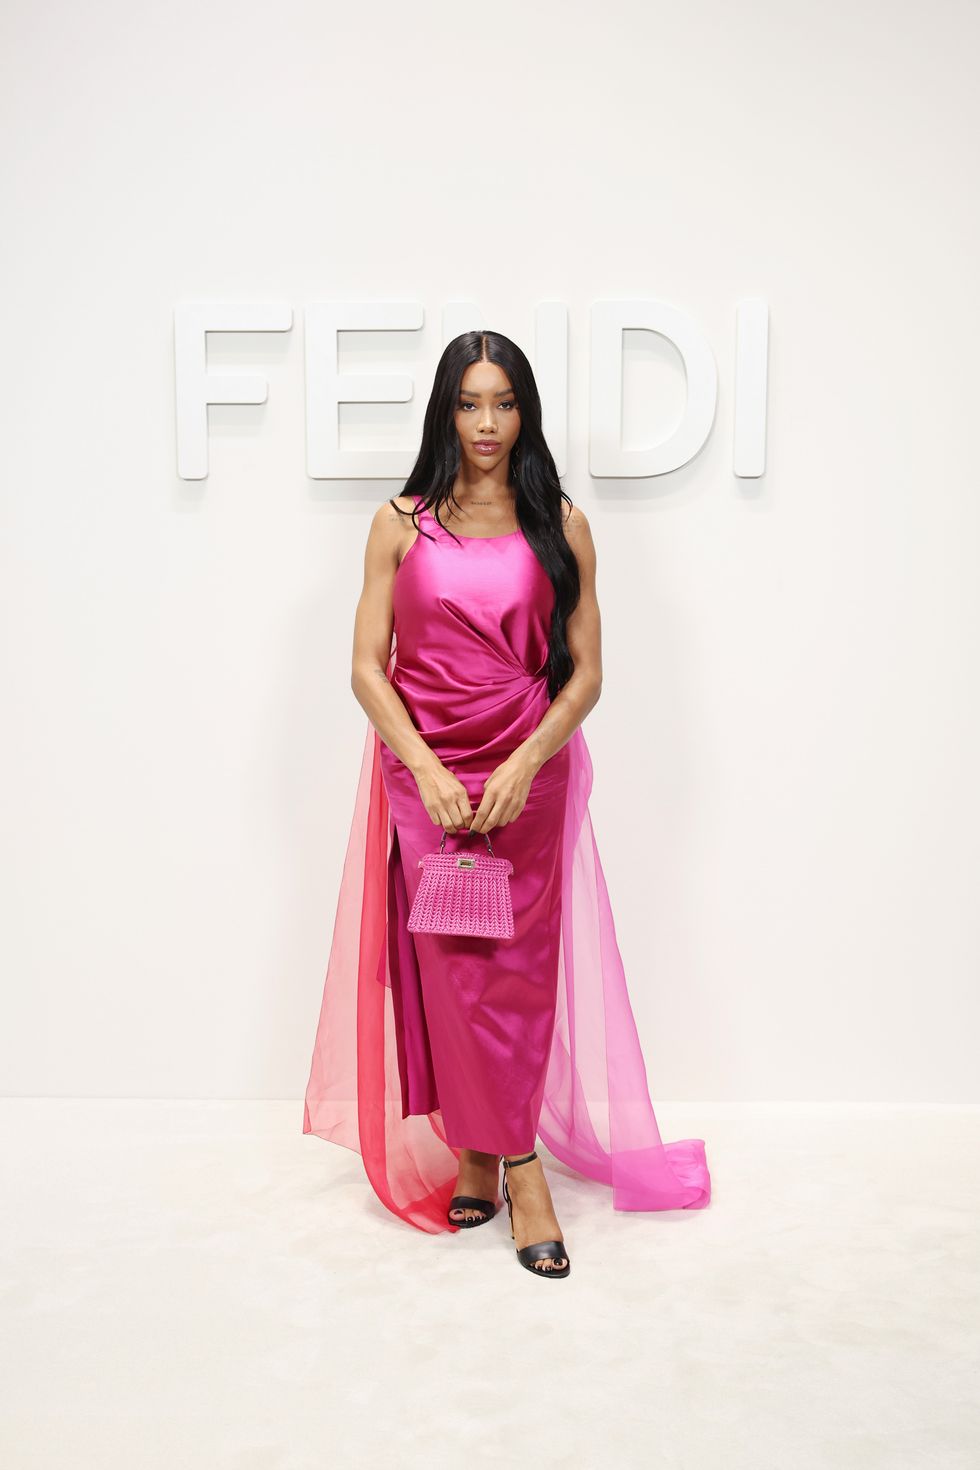 milan, italy september 20 munroe bergdorf attends the fendi spring summer 2024 fashion show on september 20, 2023 in milan, italy photo by daniele venturelligetty images for fendi